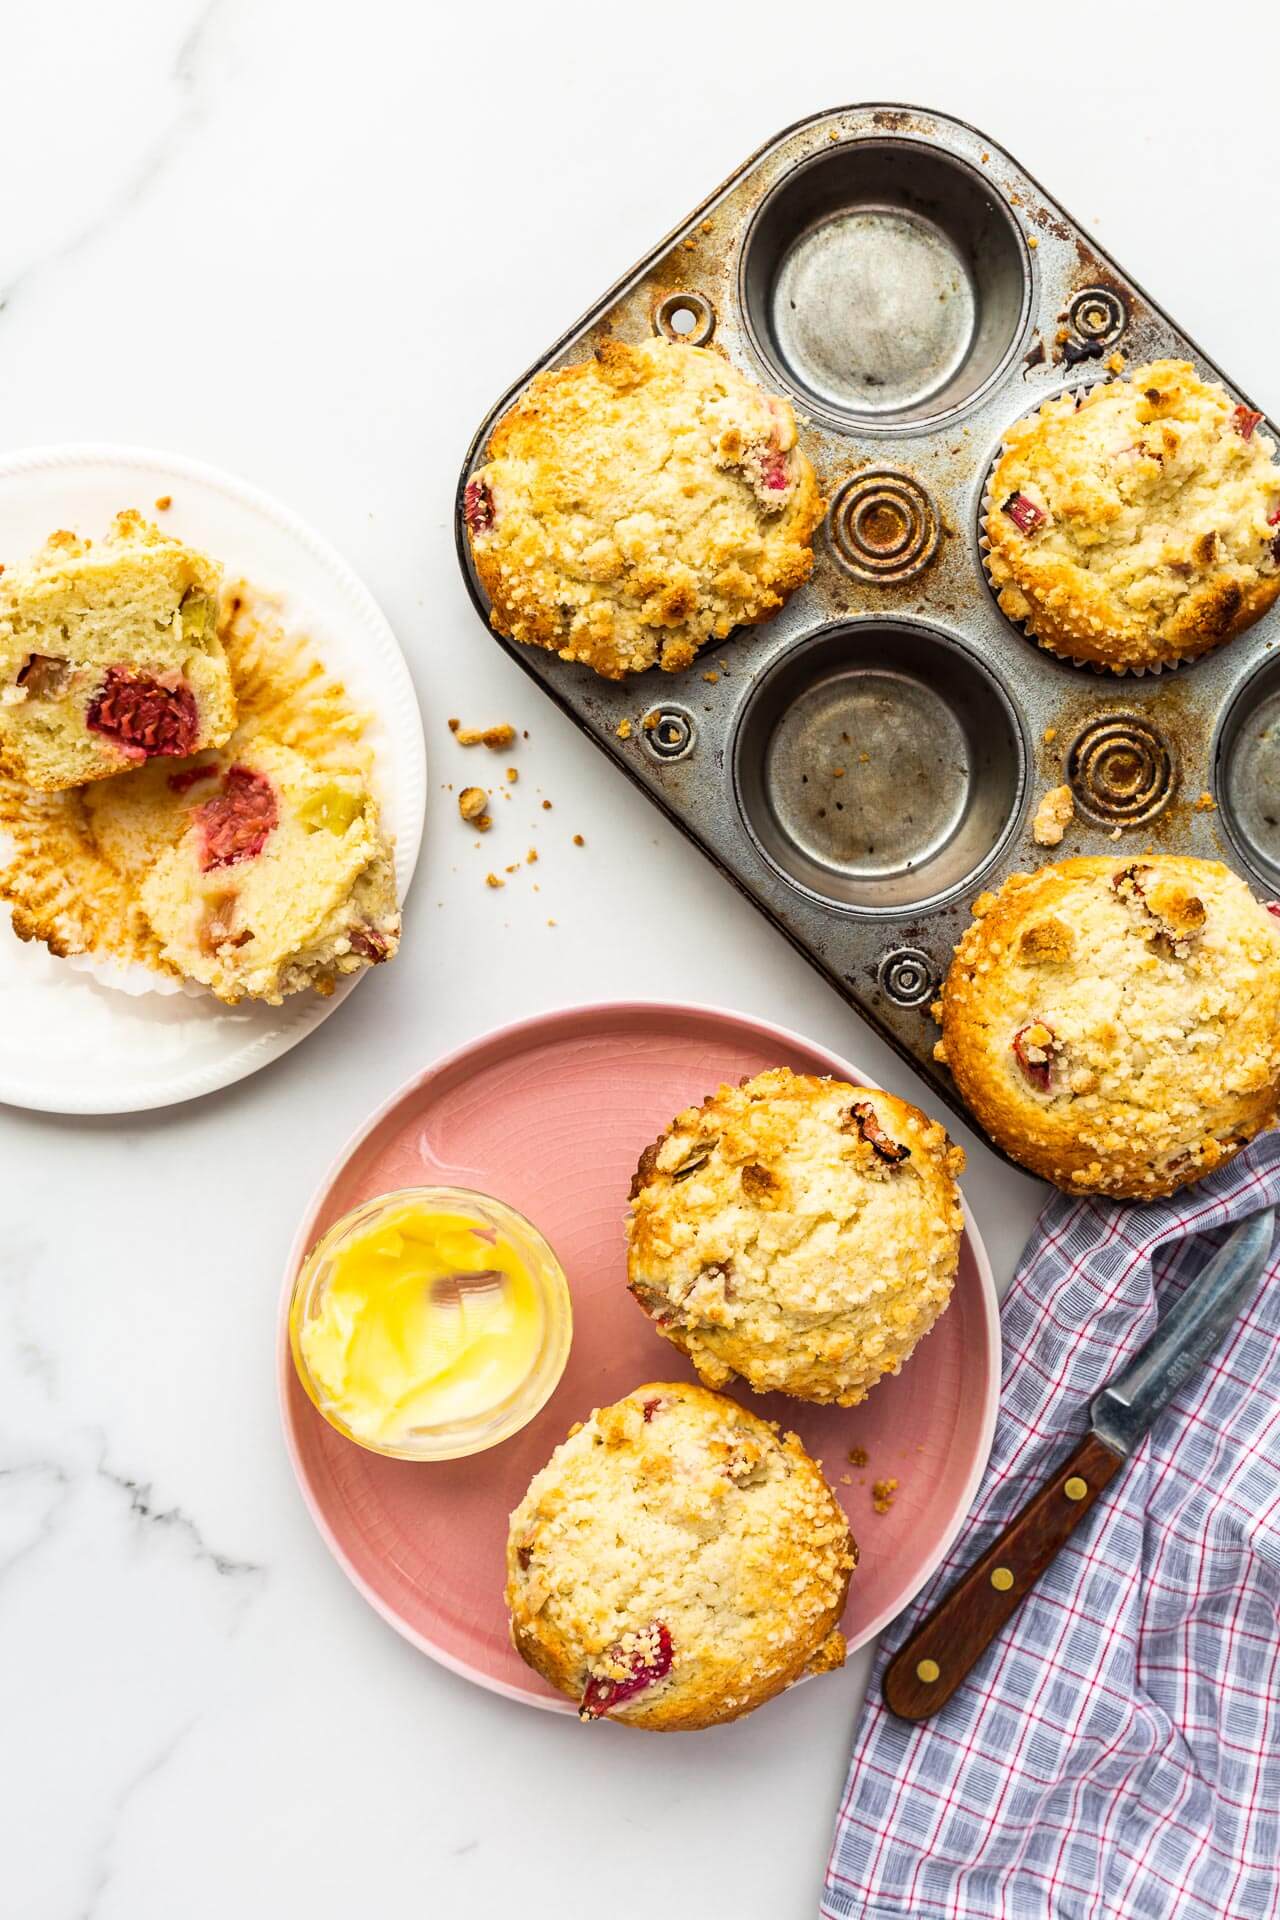 Vintage muffin pan half-full with rhubarb muffins with two on a pink plate and some butter, and another open on a little white plate